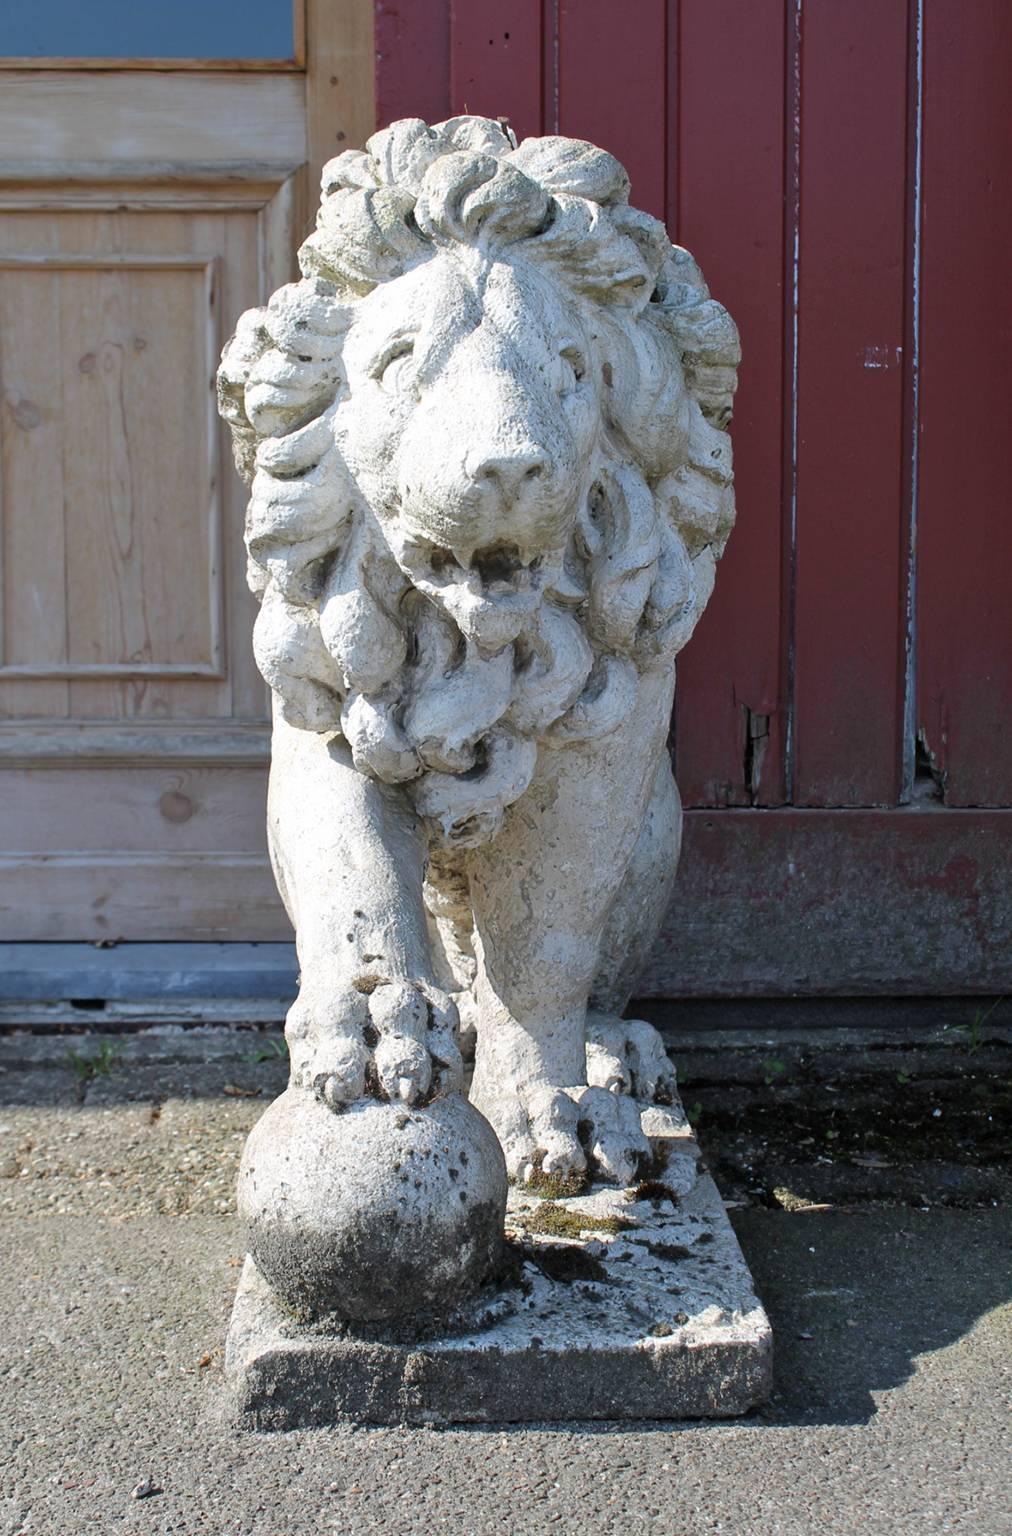 Nice statue of lions in limestone originally from France.